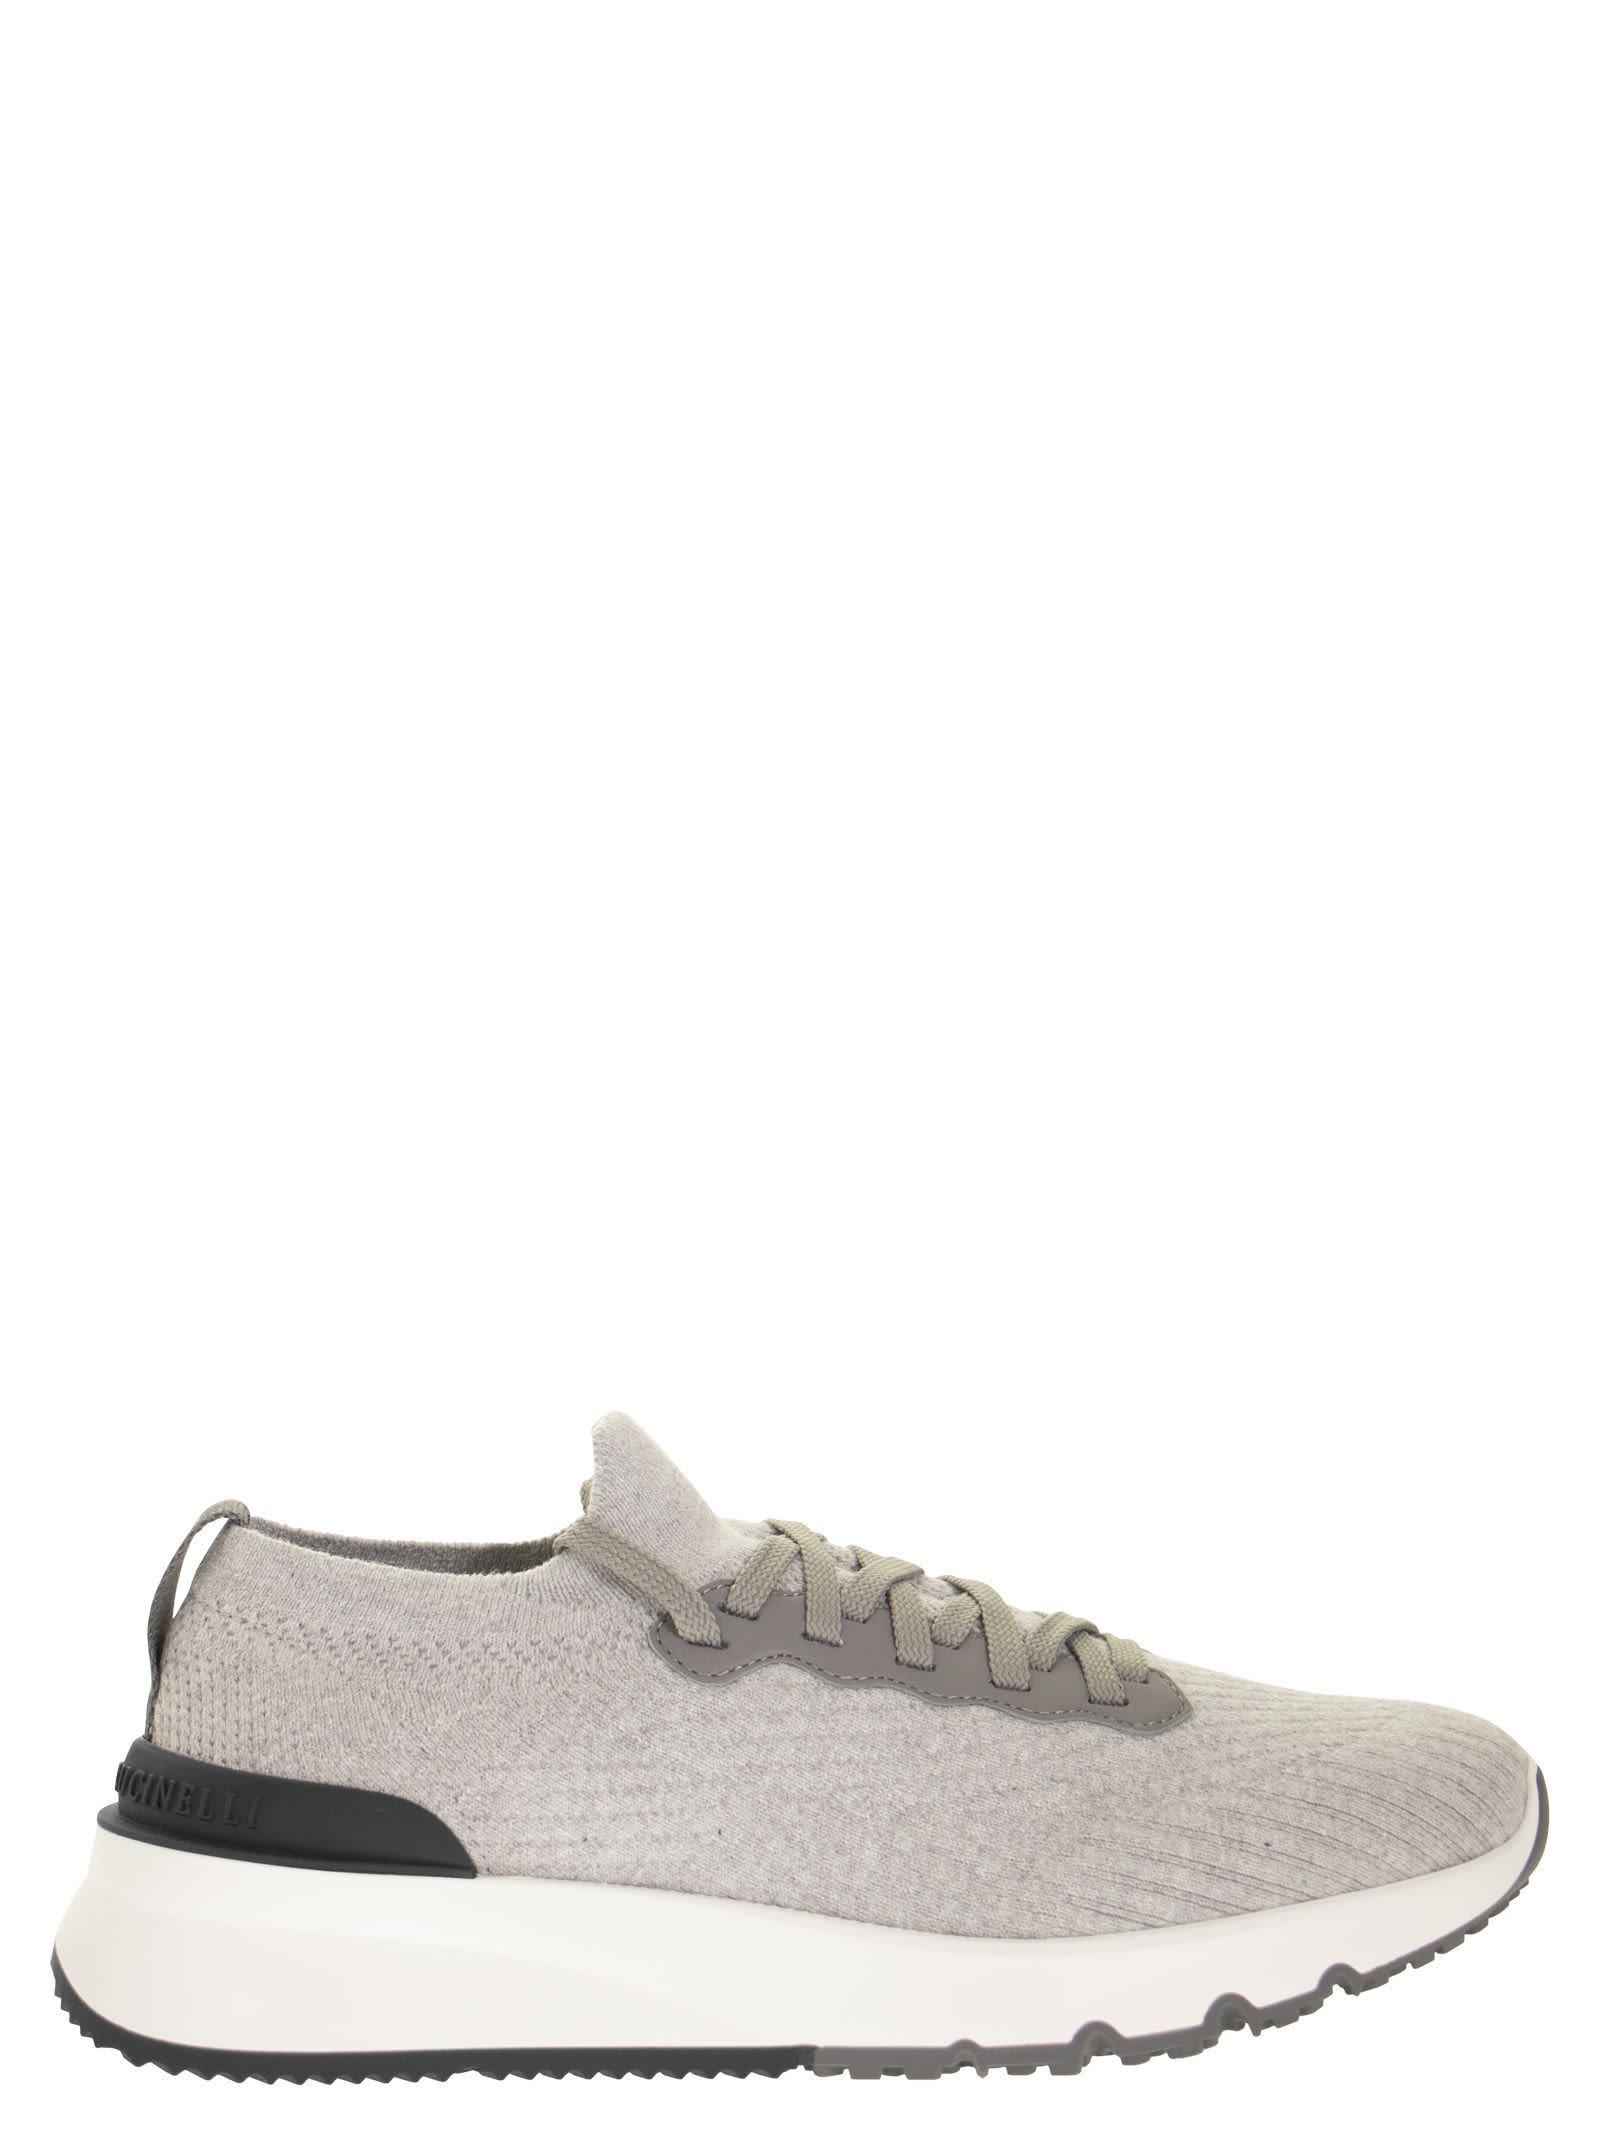 Brunello Cucinelli Runners In Cotton Knit And Semi-glossy Calf Leather In White